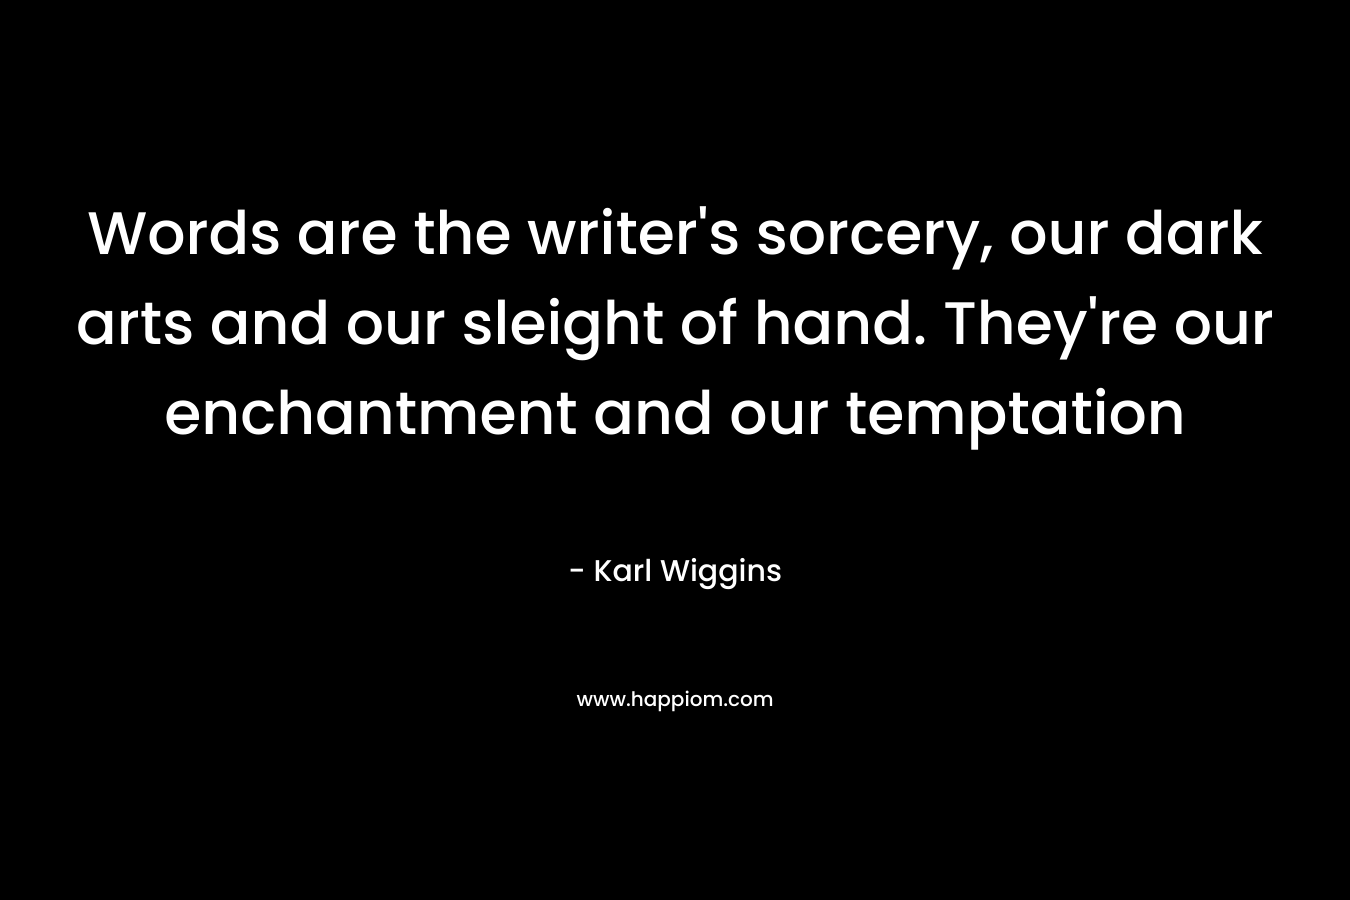 Words are the writer’s sorcery, our dark arts and our sleight of hand. They’re our enchantment and our temptation – Karl Wiggins